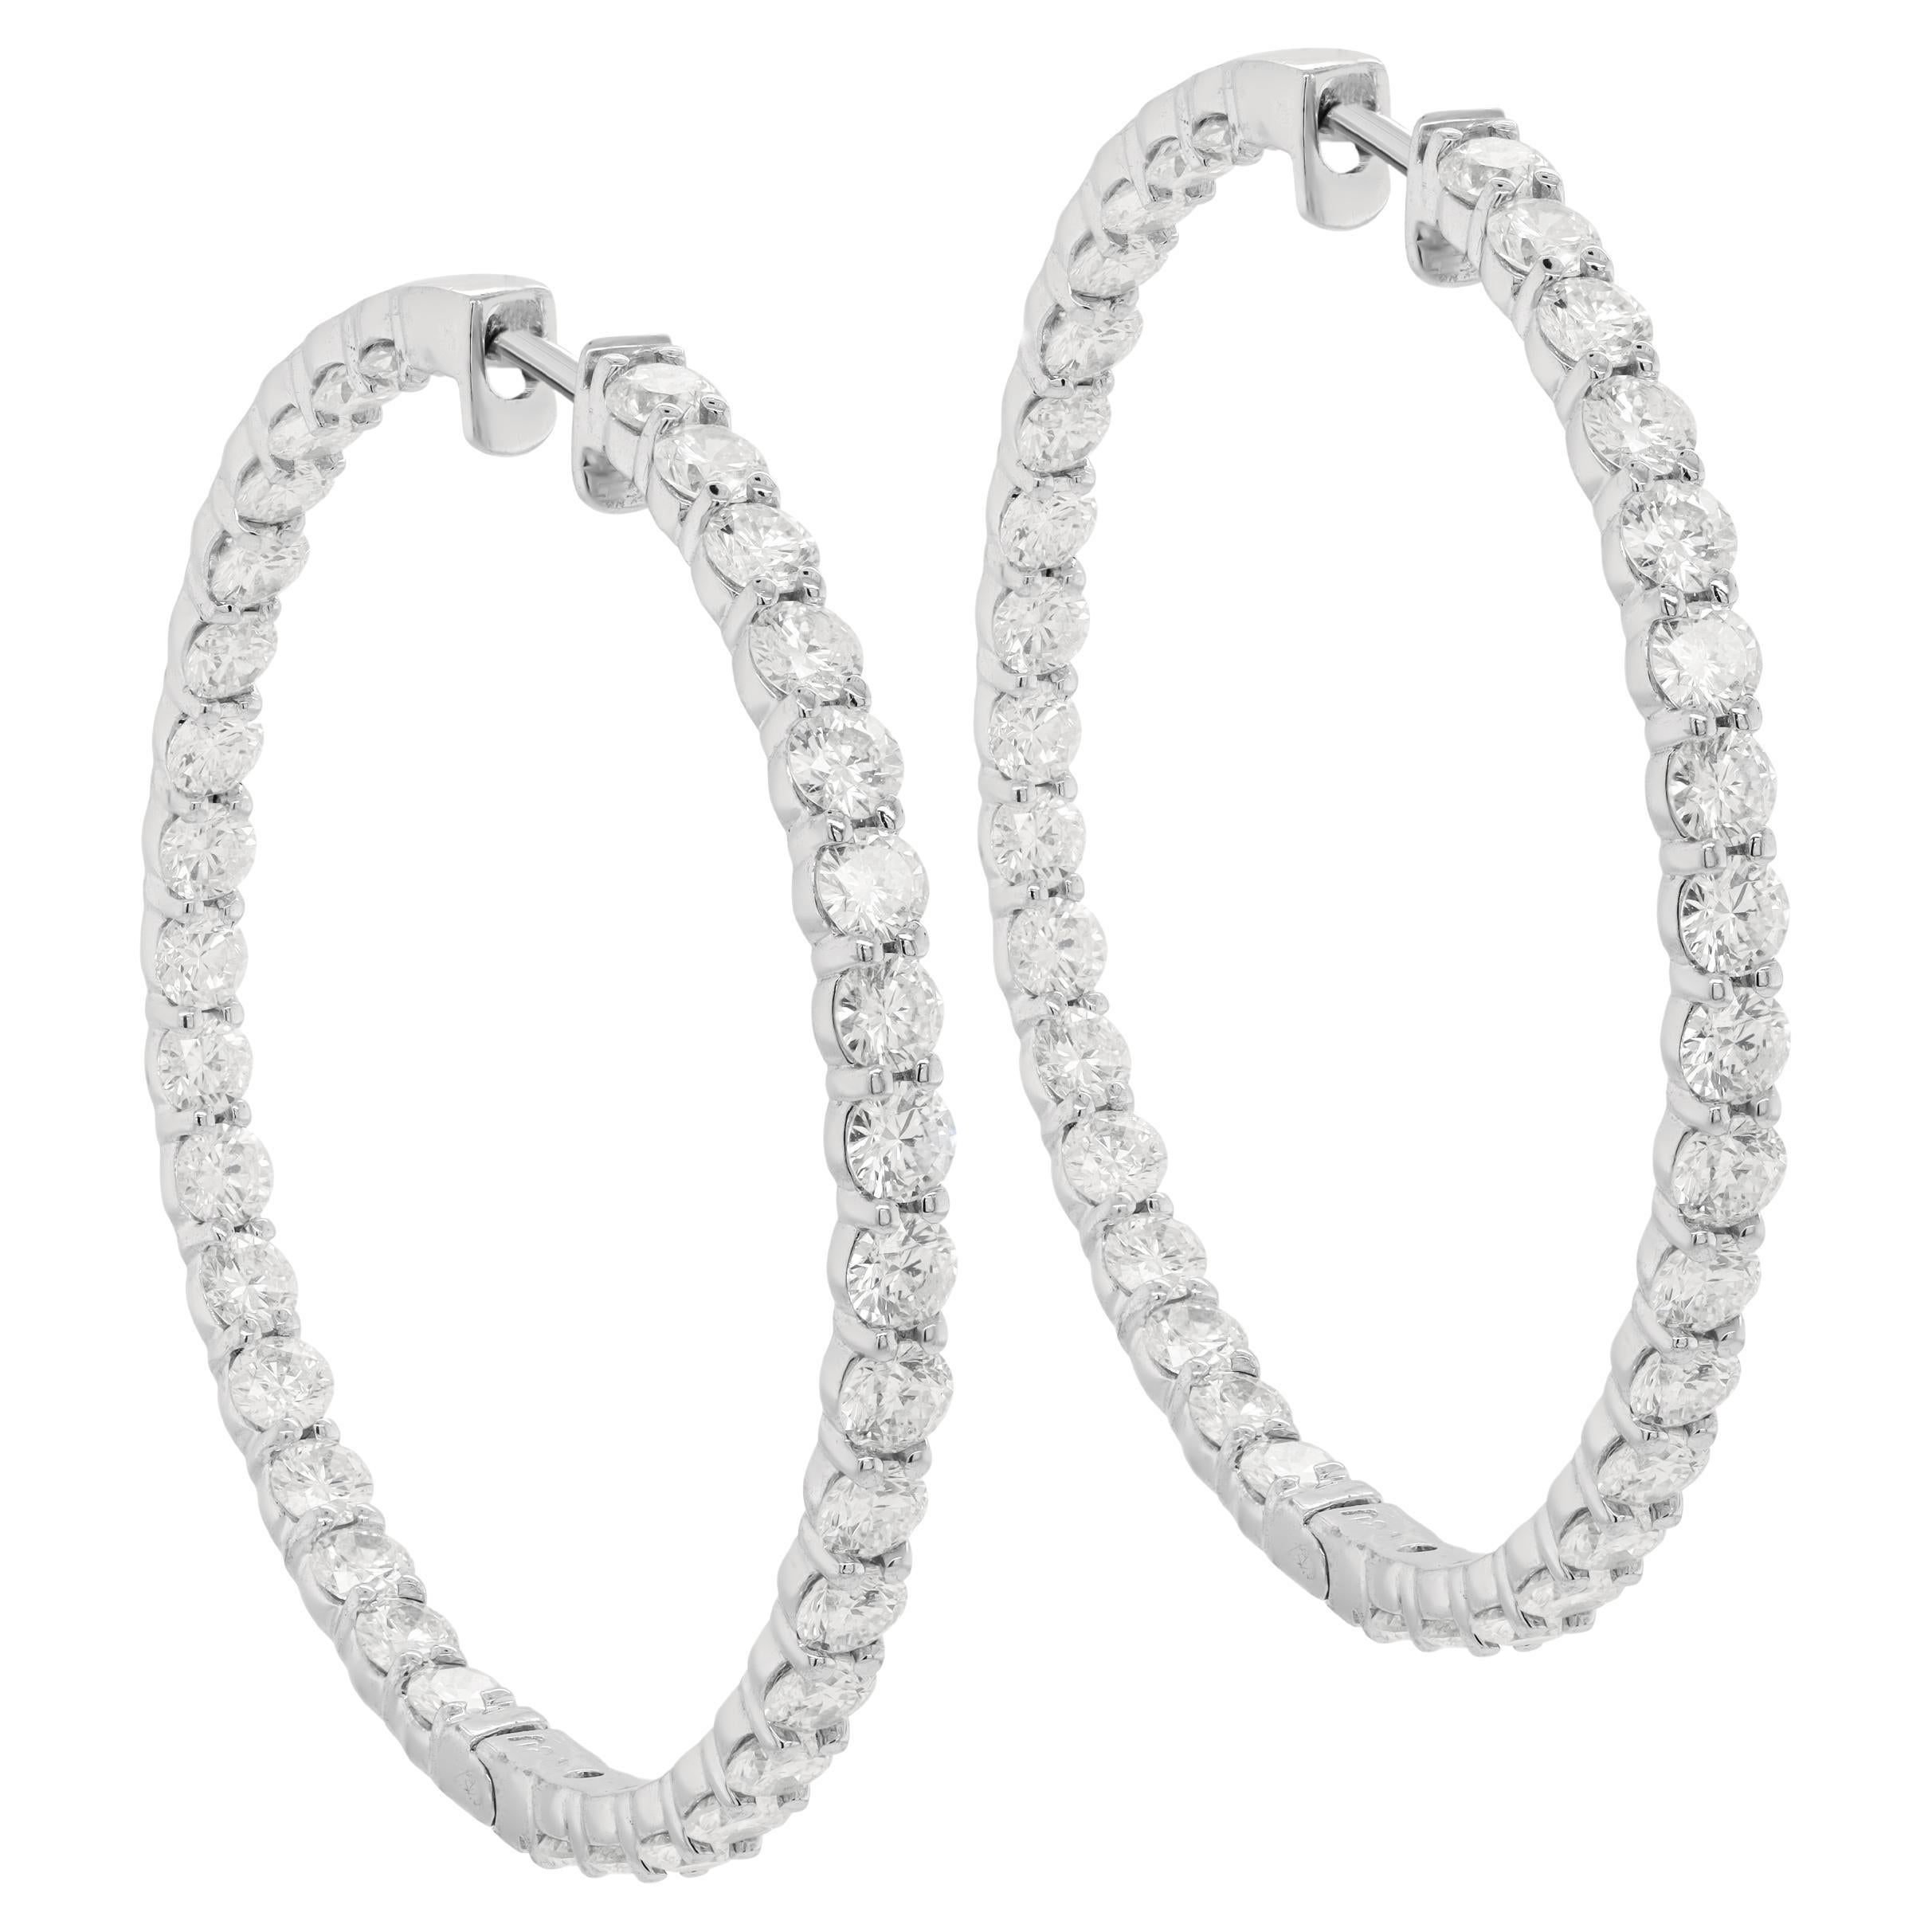 Diana M. 14 kt white gold, 2.00" inside-out hoop earrings adorned with 9.45 cts  For Sale